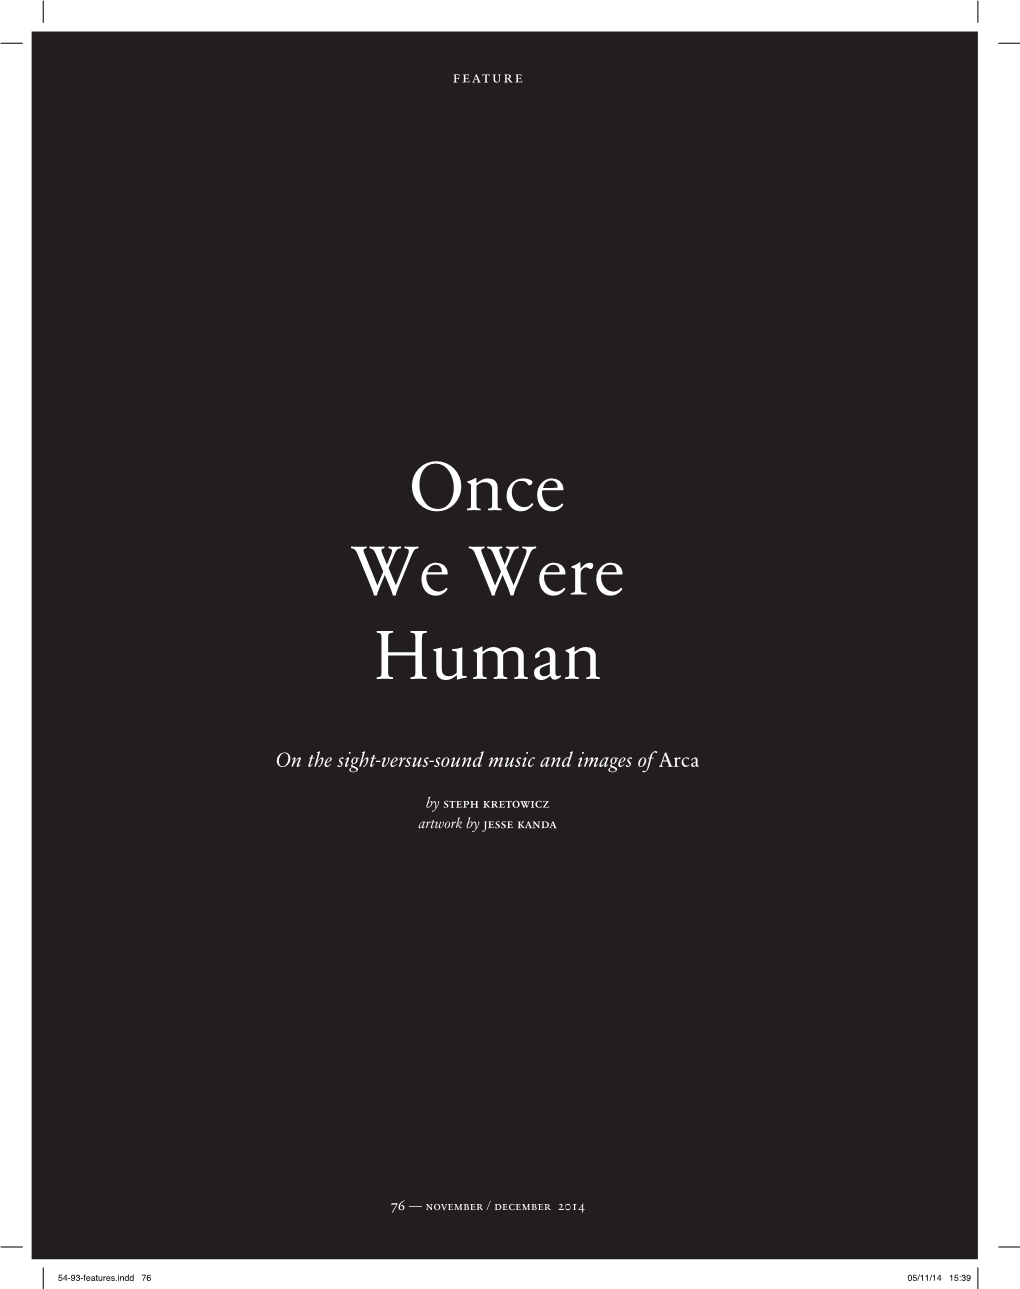 Once We Were Human